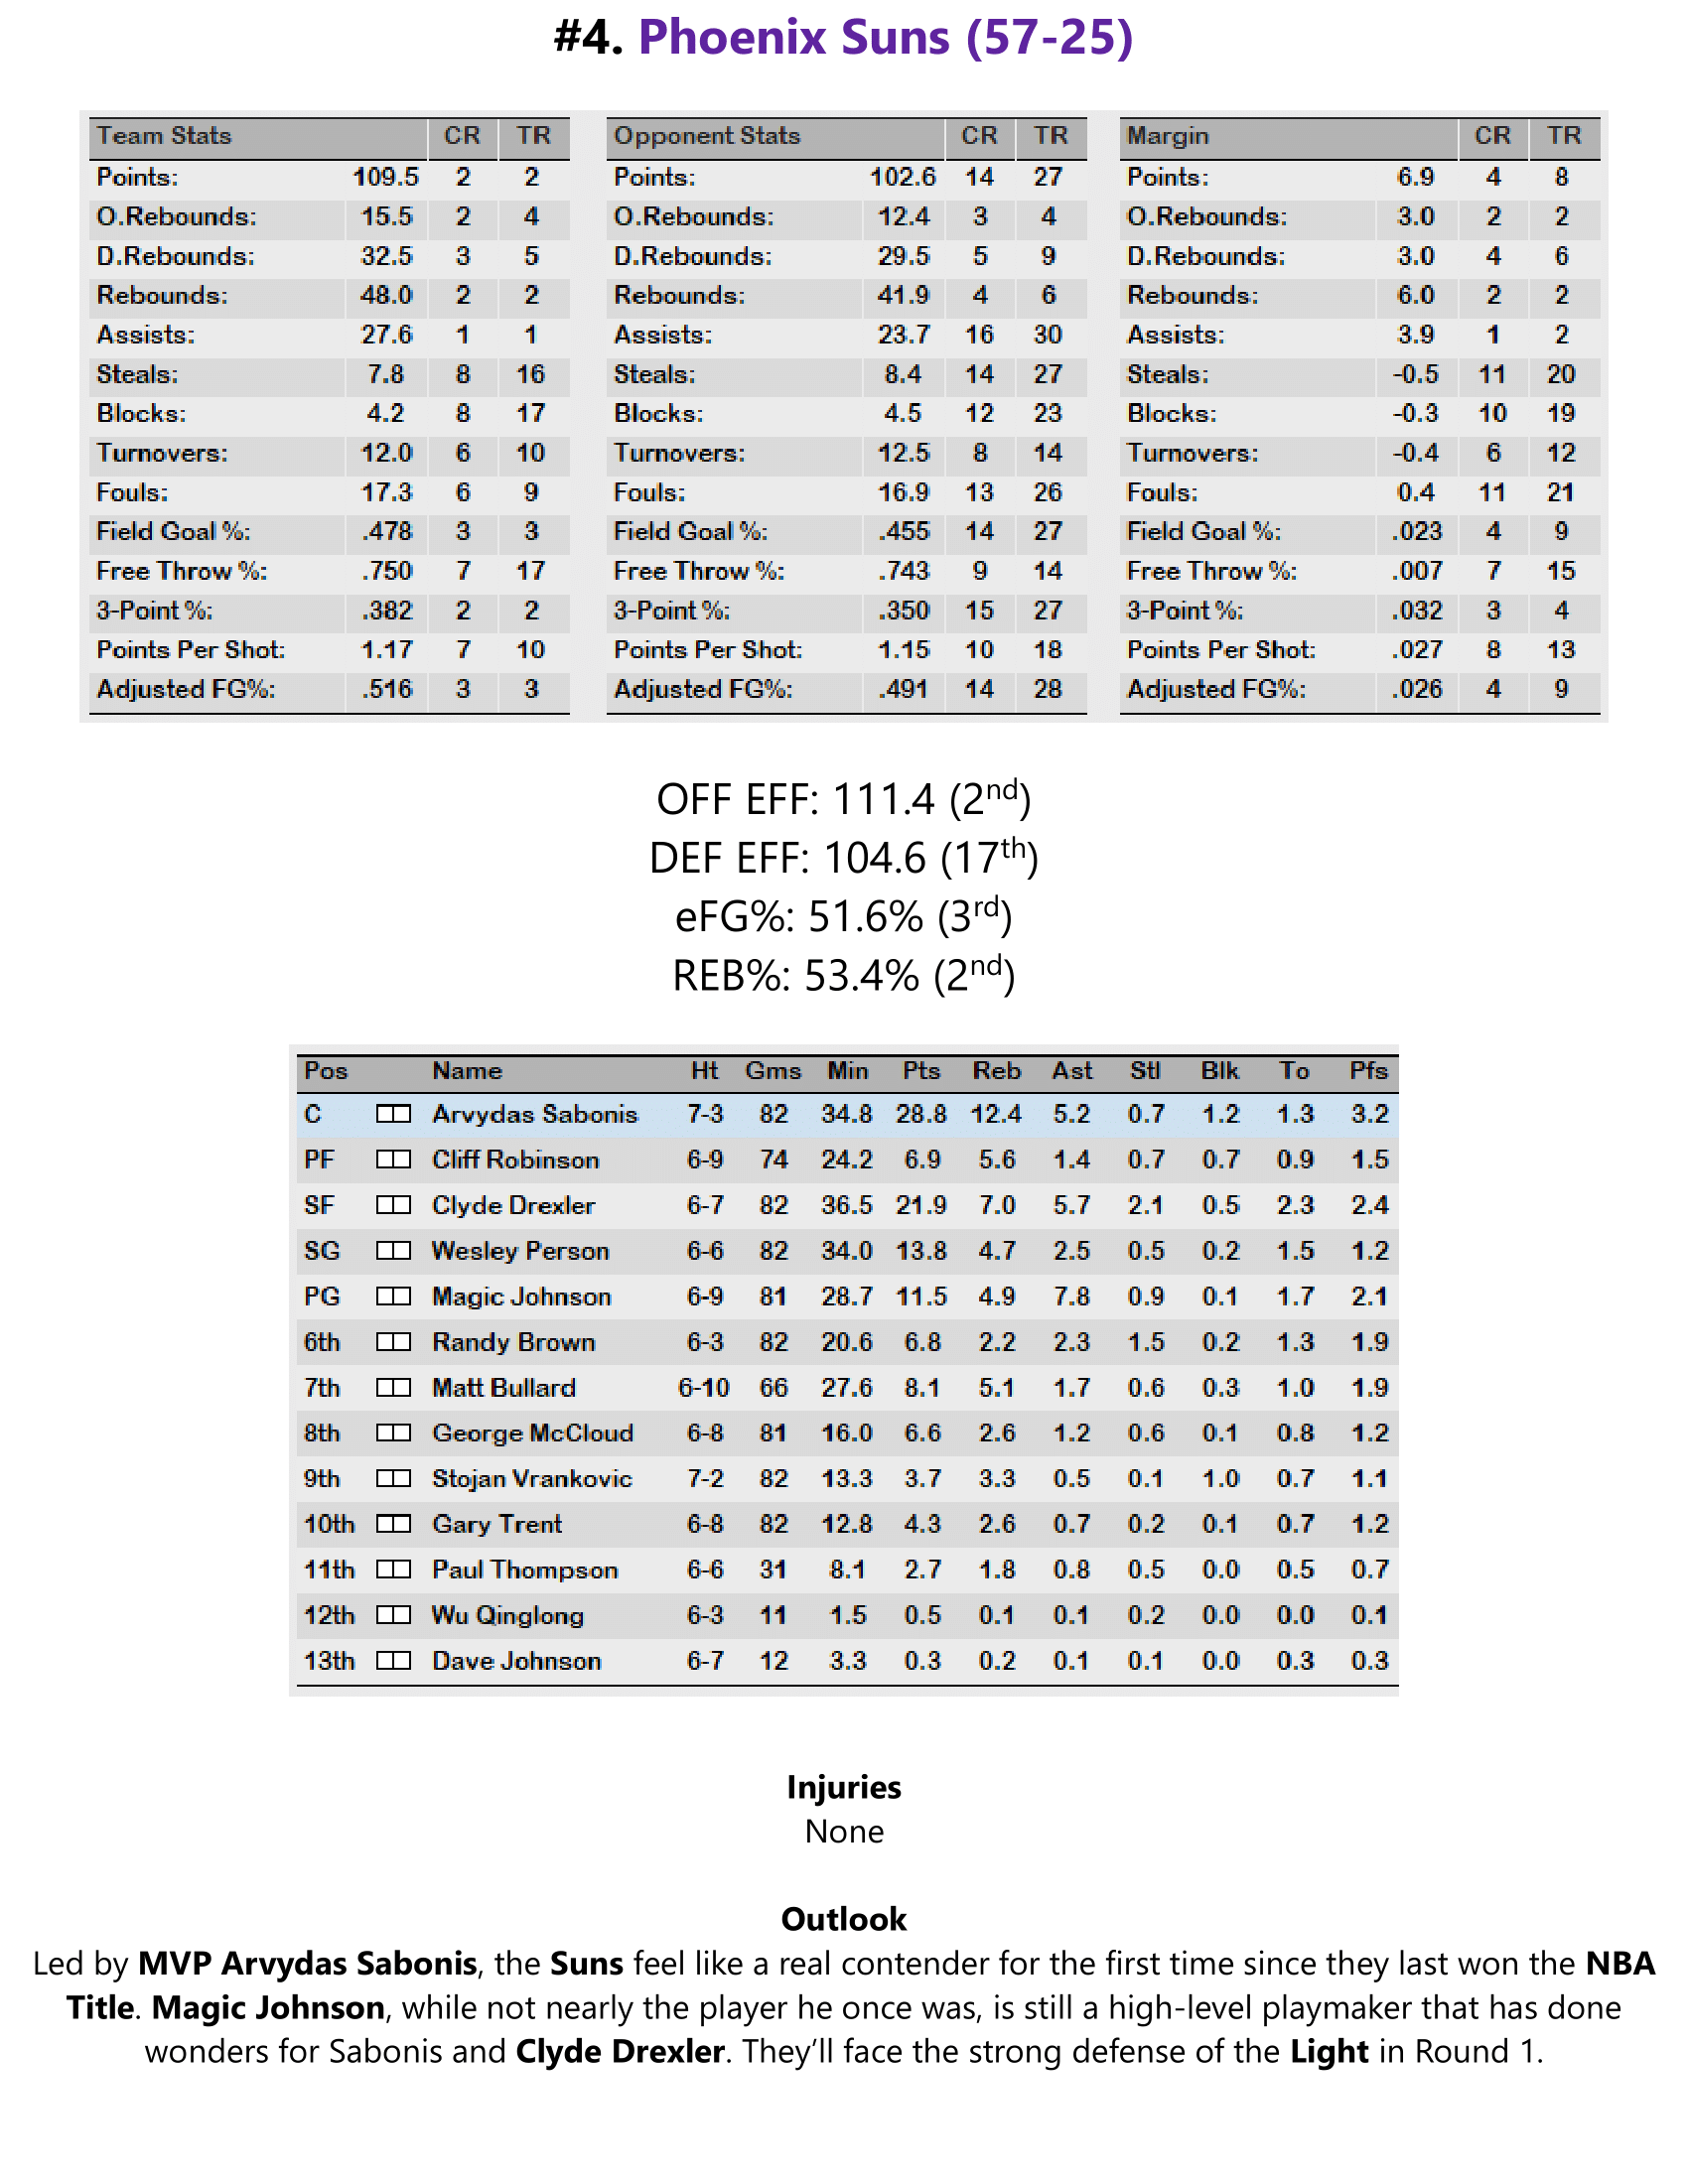 95-96-Part-3-Playoff-Preview-05.png